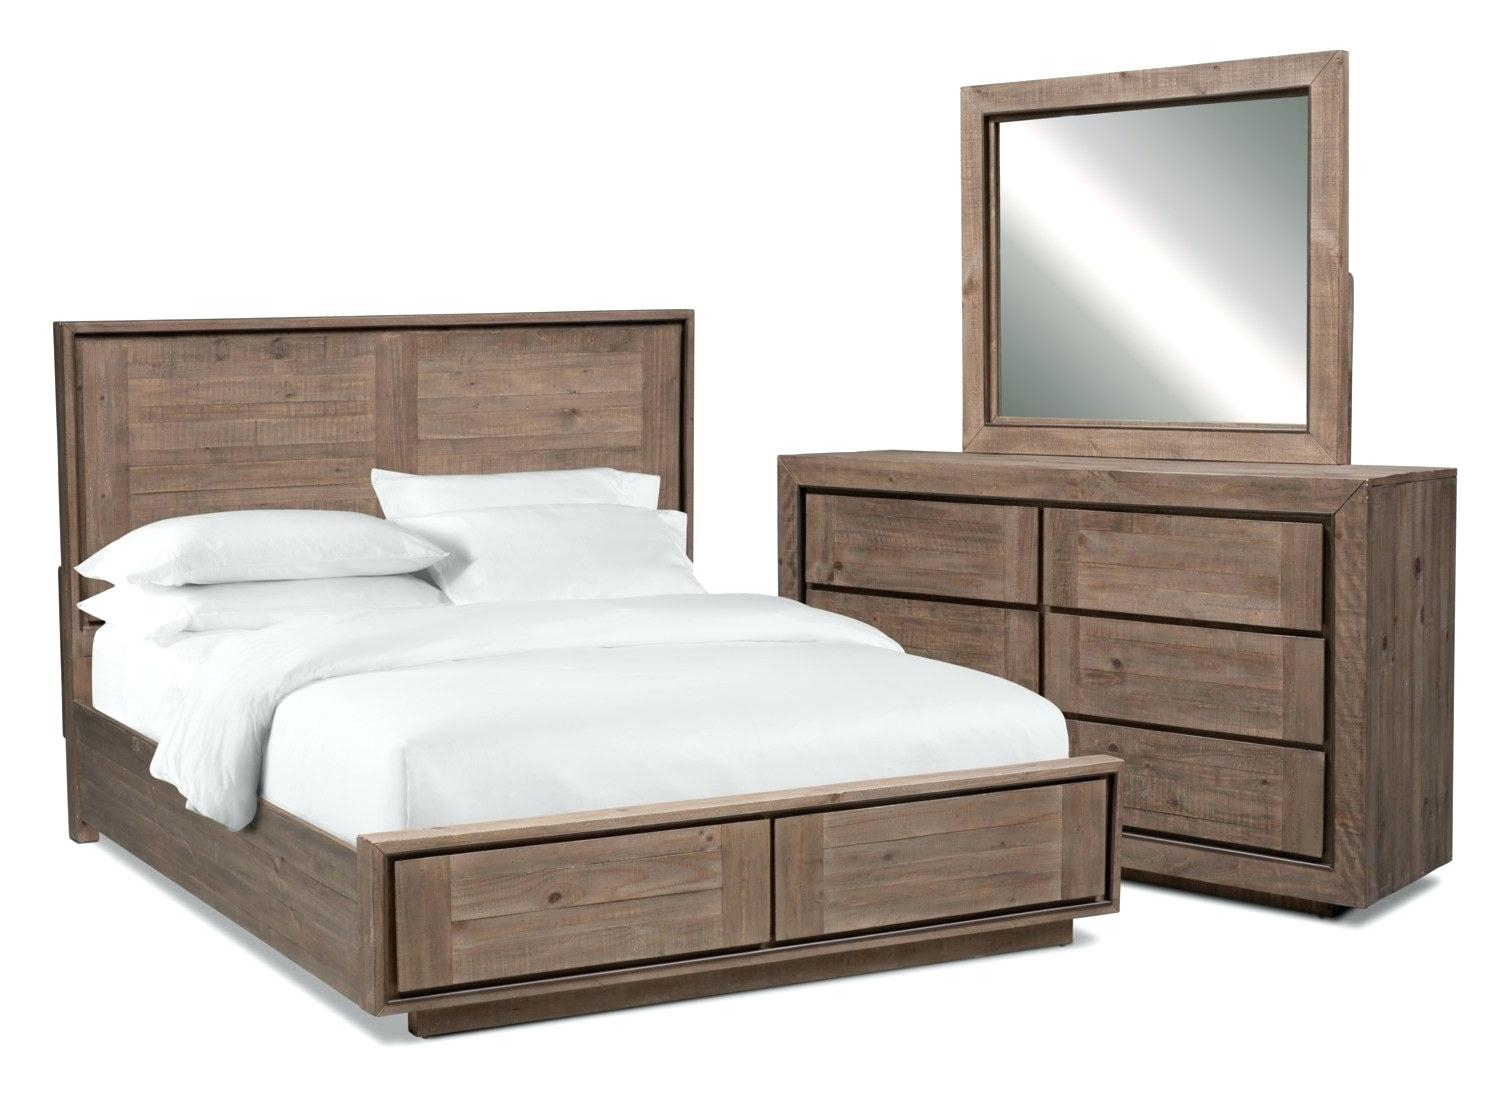 Charming Queen Storage Bedroom Set Black Bed Ashfield Furniture Home intended for proportions 1500 X 1100